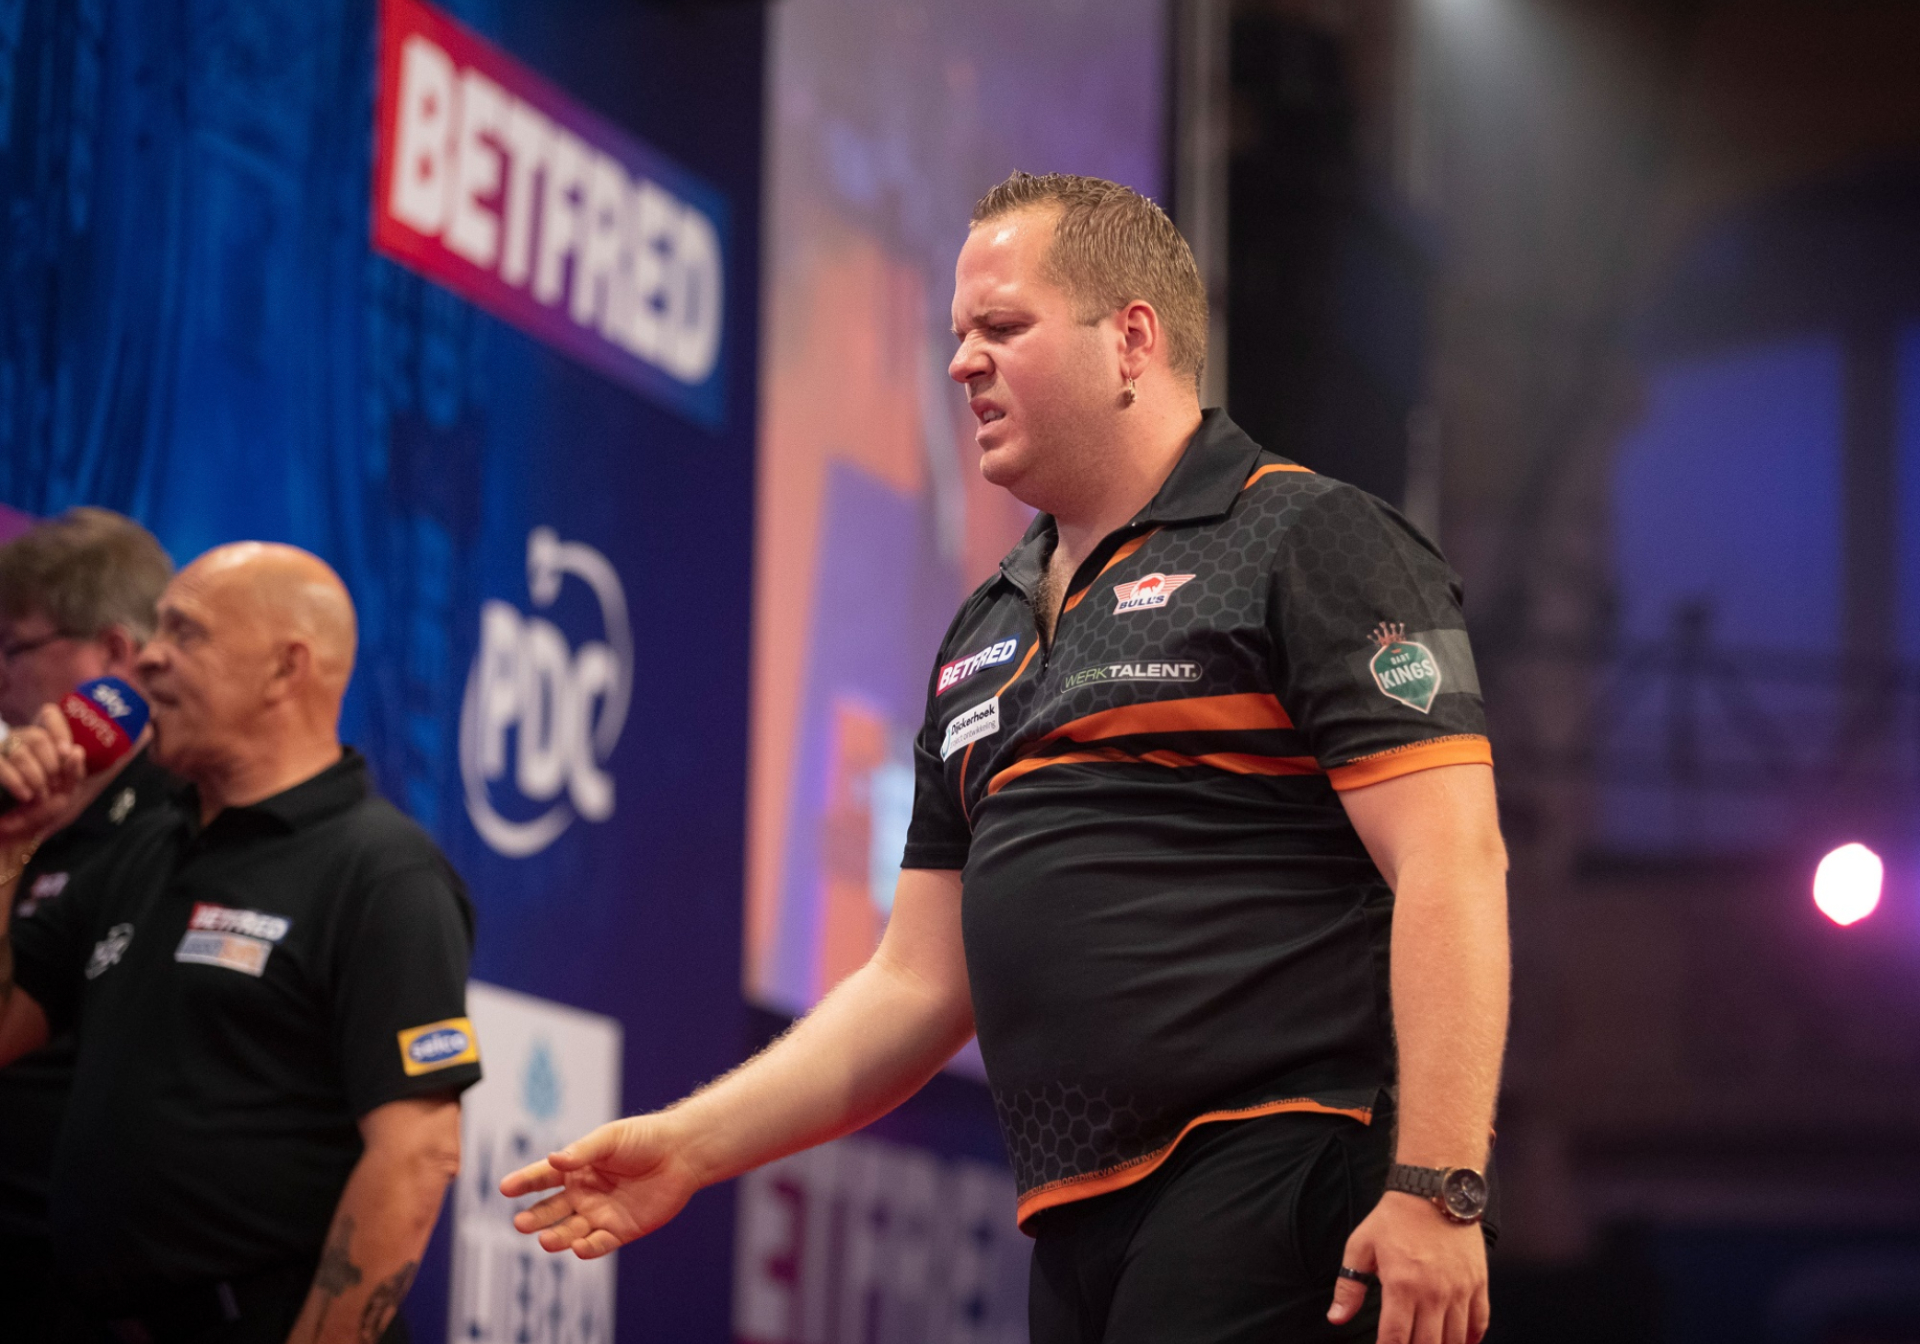 Van Duijvenbode cuts a frustrated figure at the Betfred World Matchplay